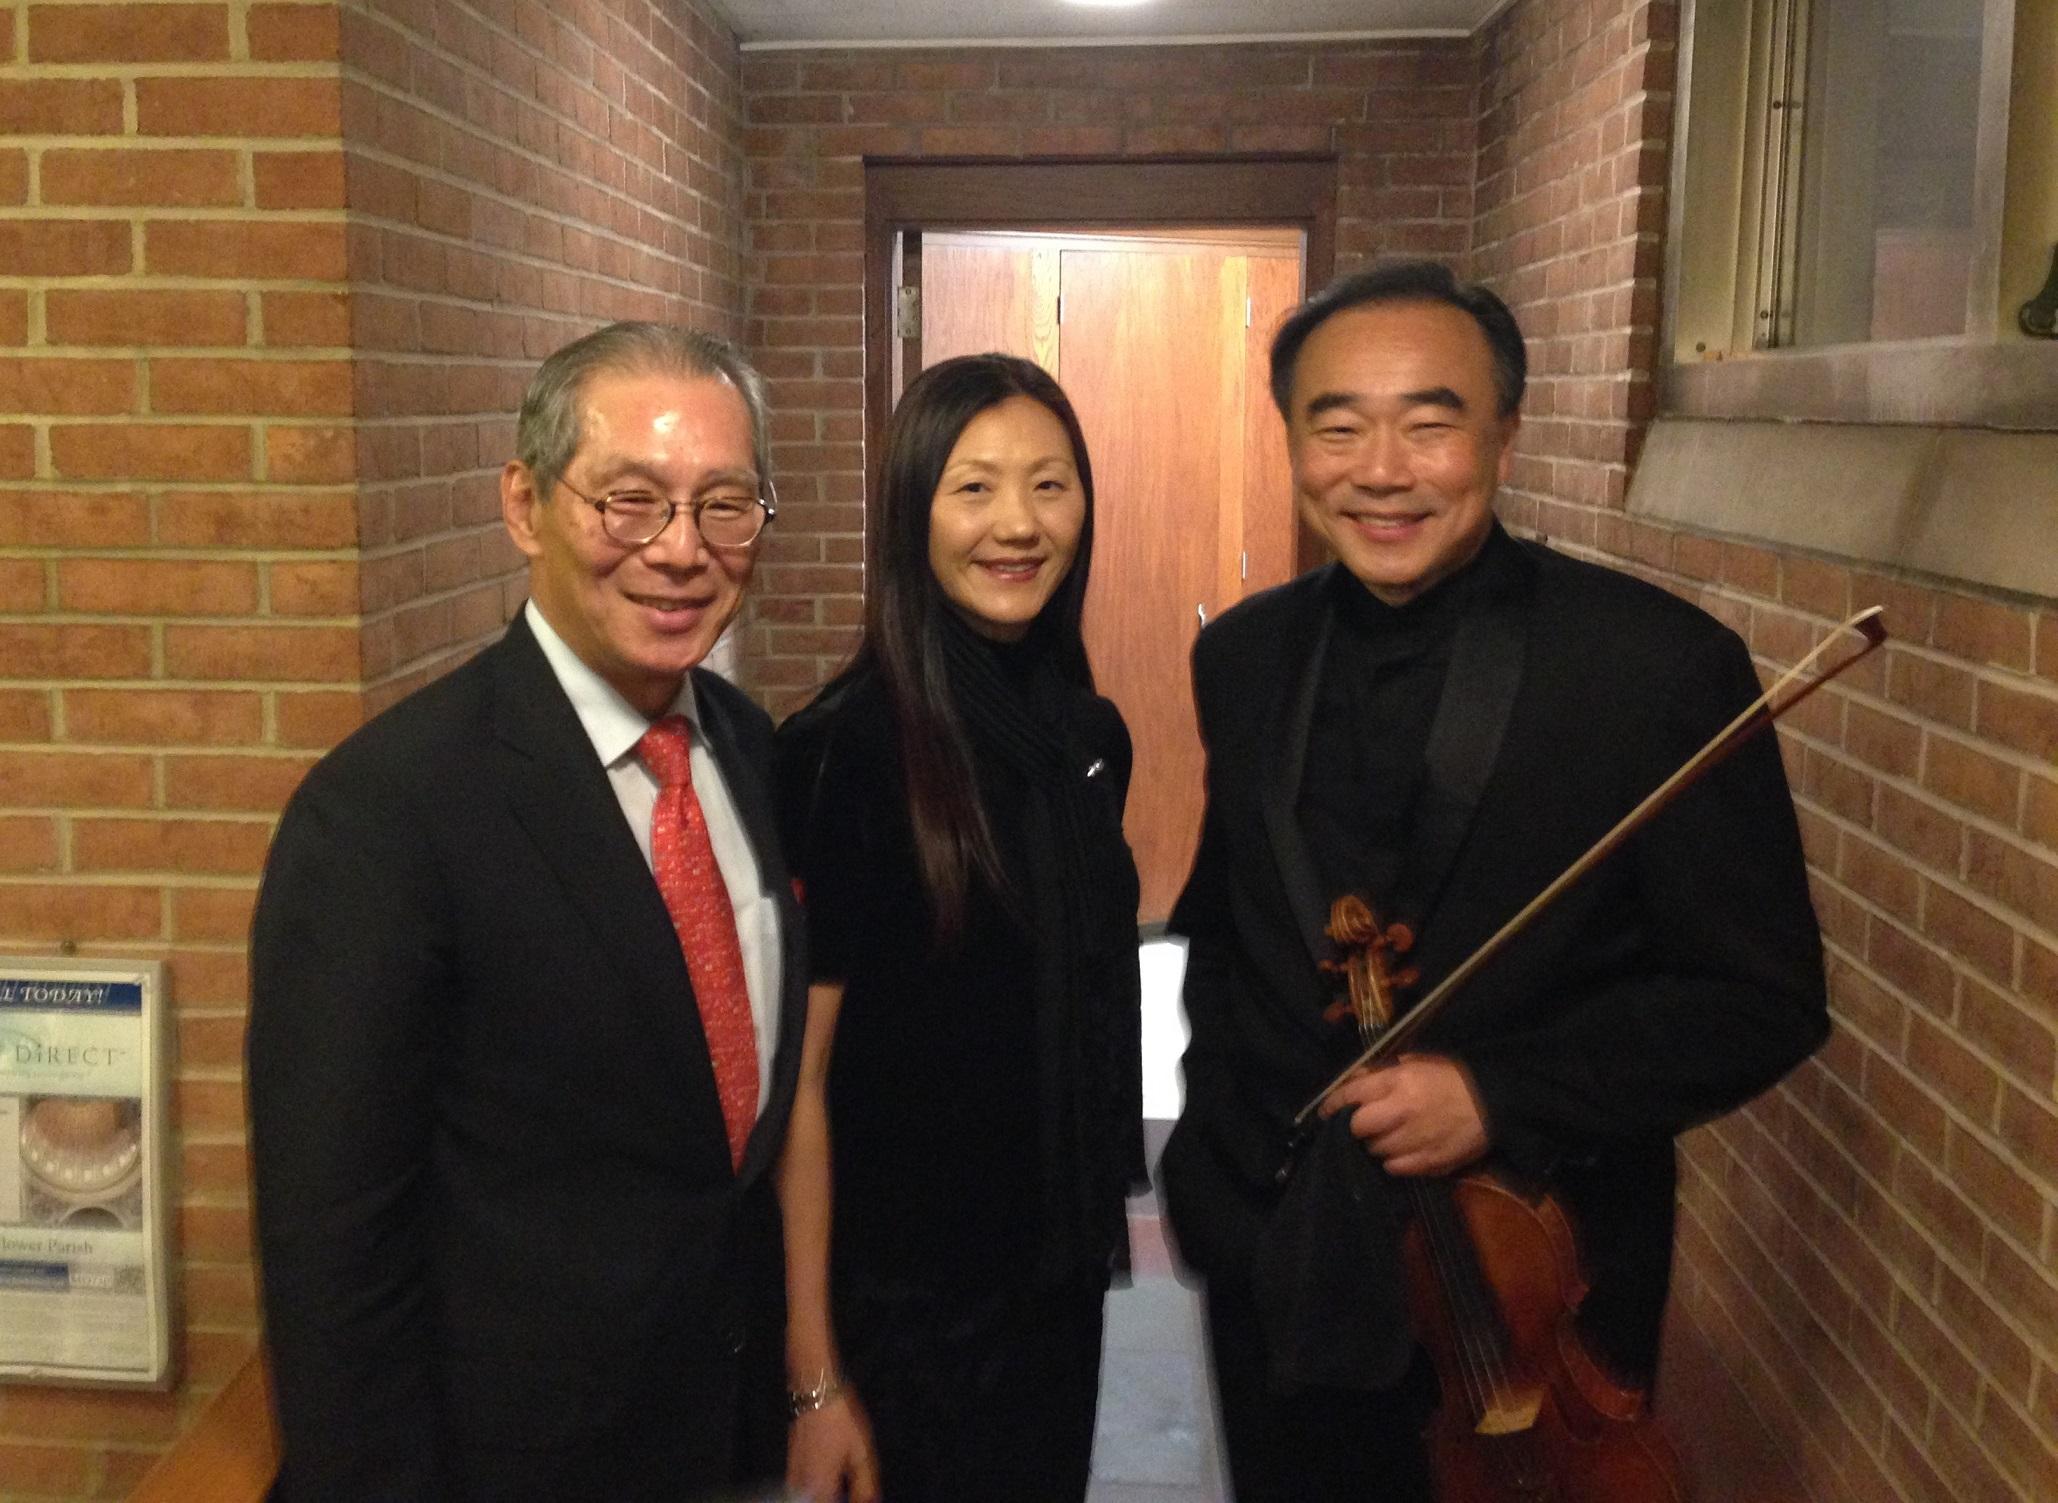 Representative and Mrs. Stanley Kao greeted world-renowned violinist Cho-Liang Lin during the artist's appearance with the Apollo Orchestra in Bethesda, MD on September 30, 2016.